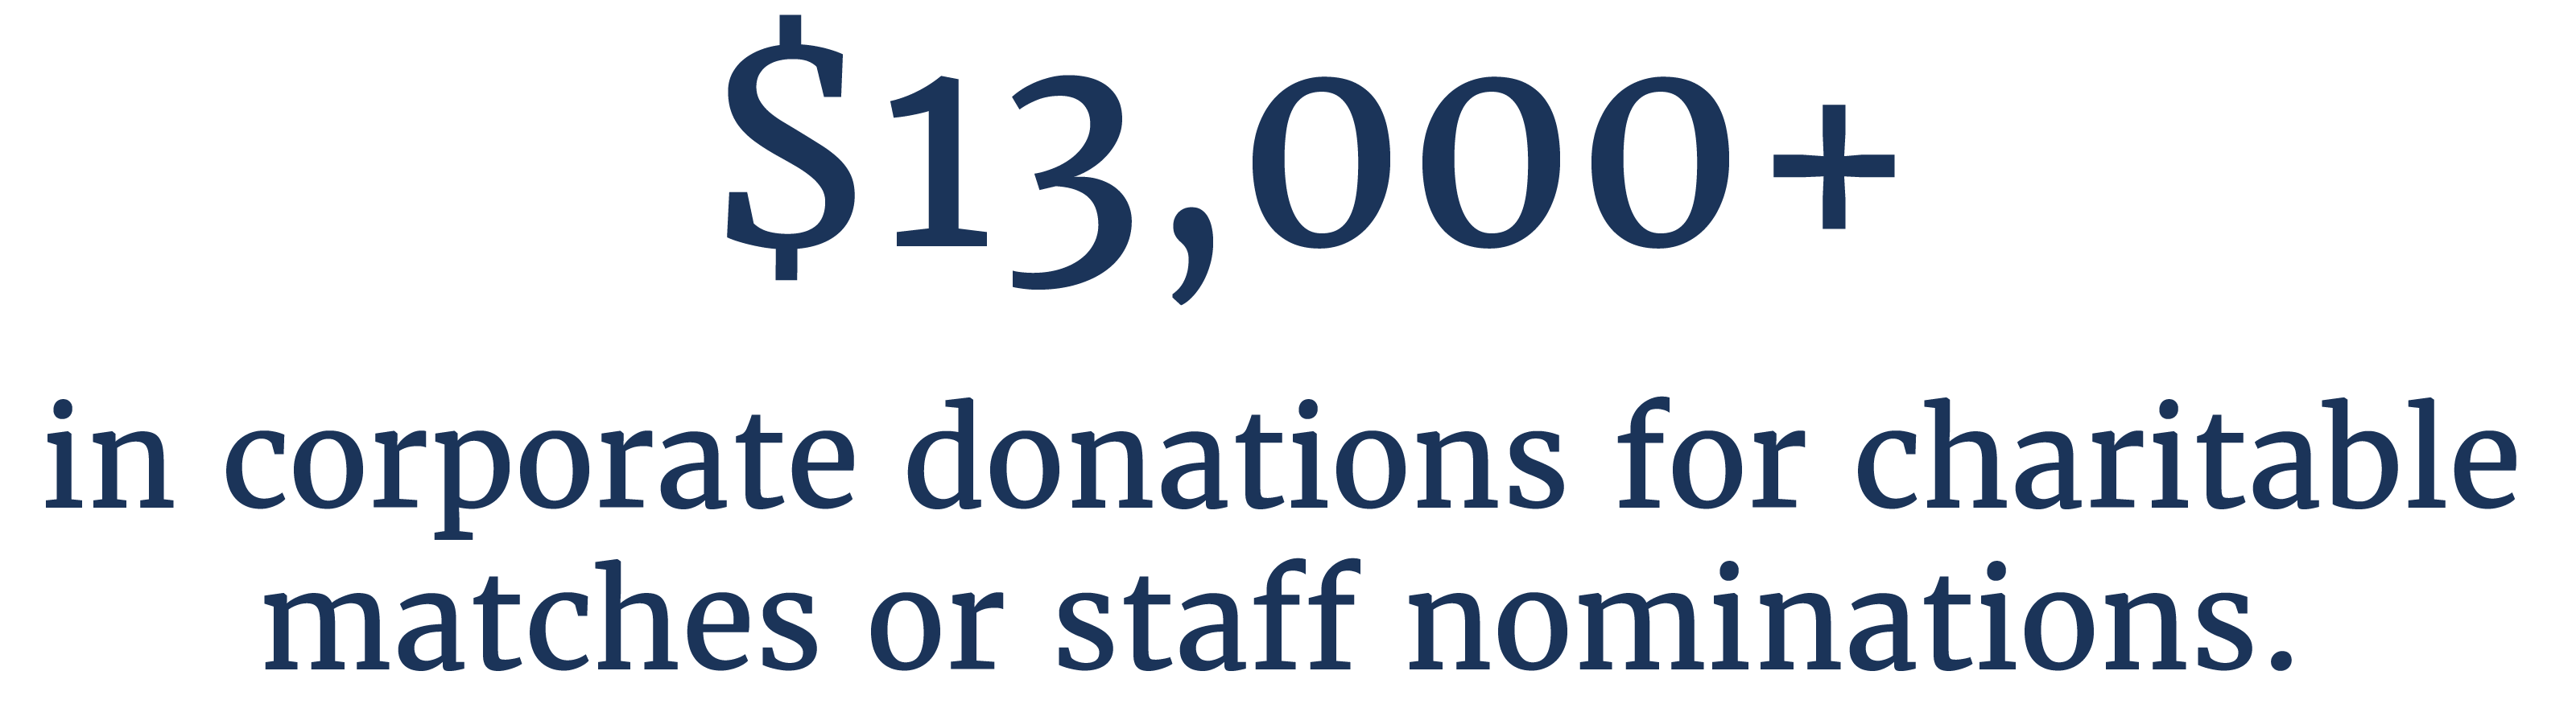 $13,000+ in corporate donations for charitable matches or staff nominations.